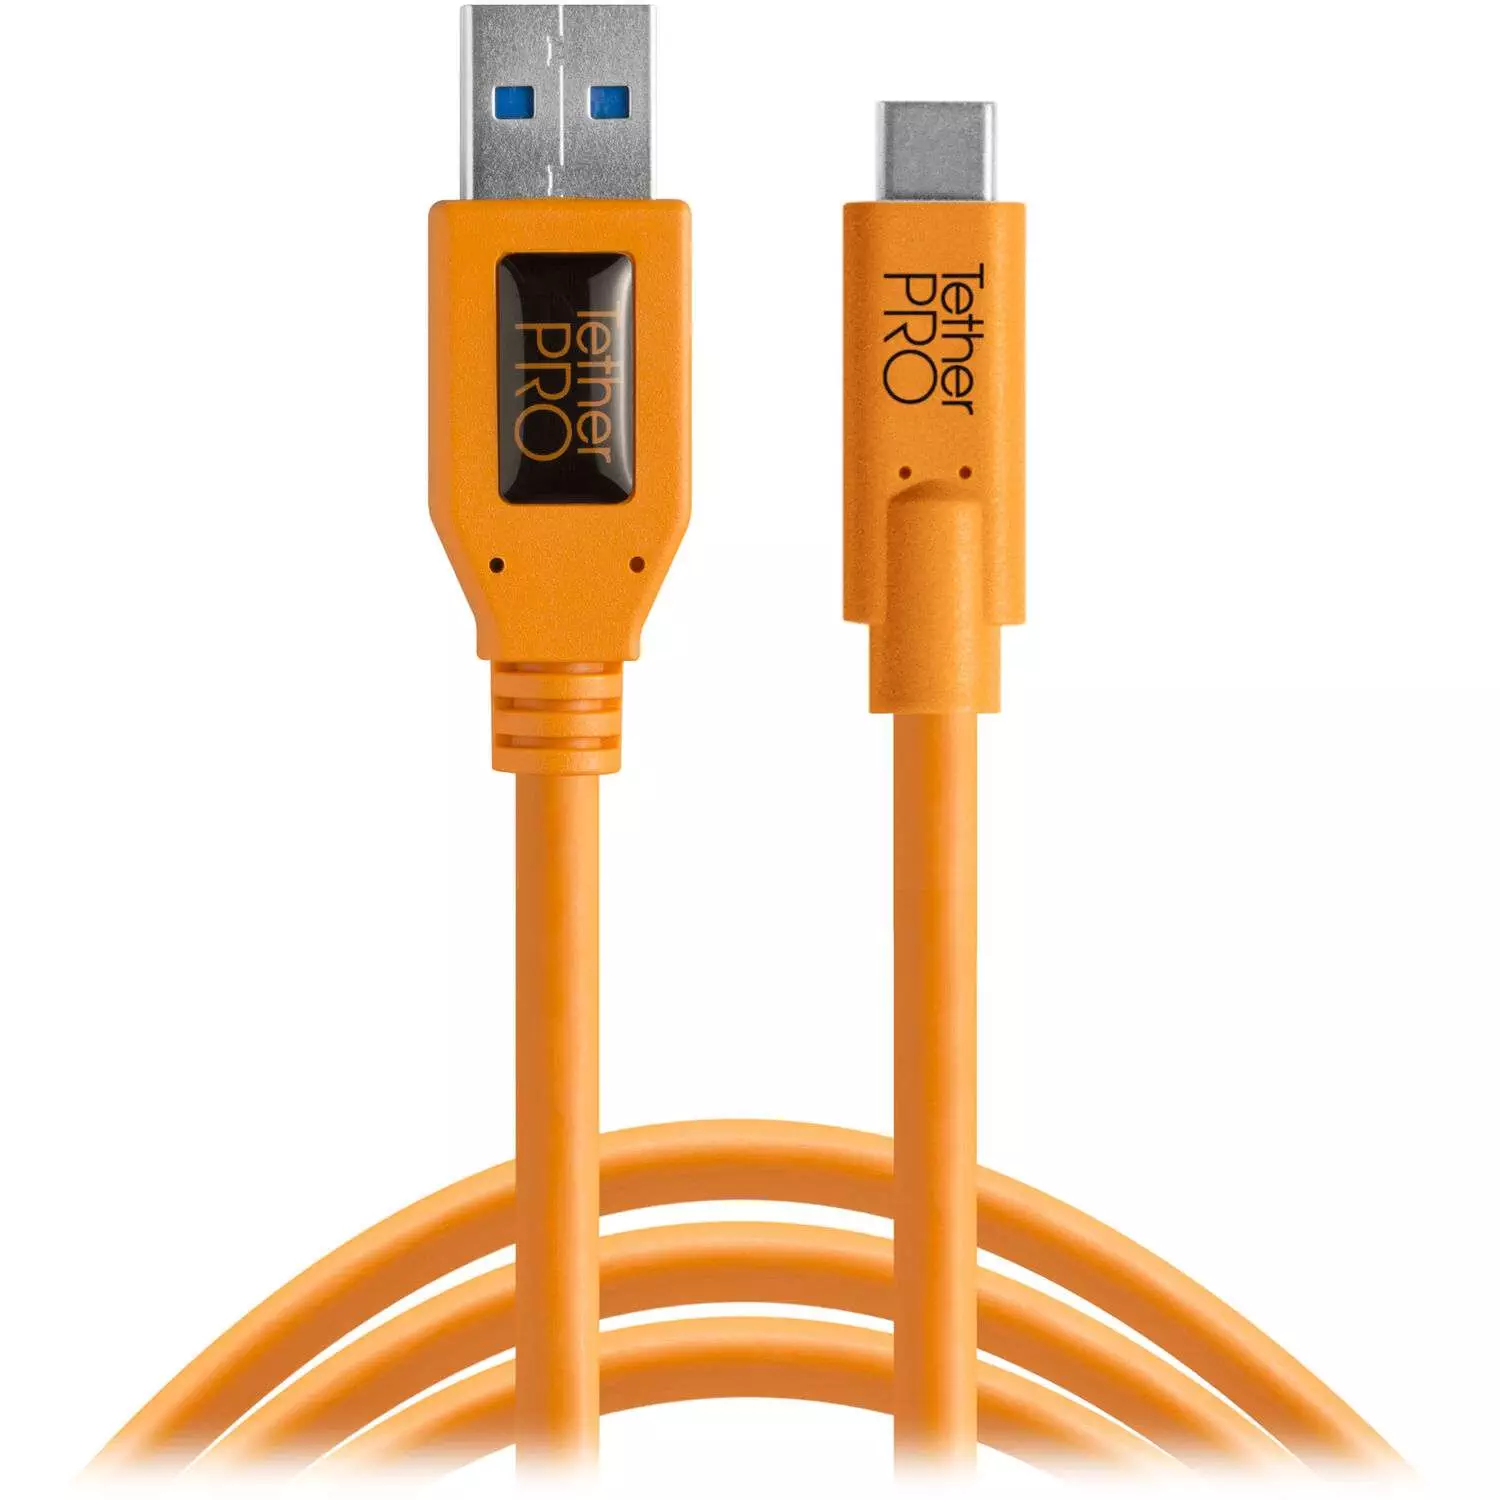 Tether Tools TetherPro USB Type-C Male to USB 3.0 Type-A Male Cable (15', Orange)